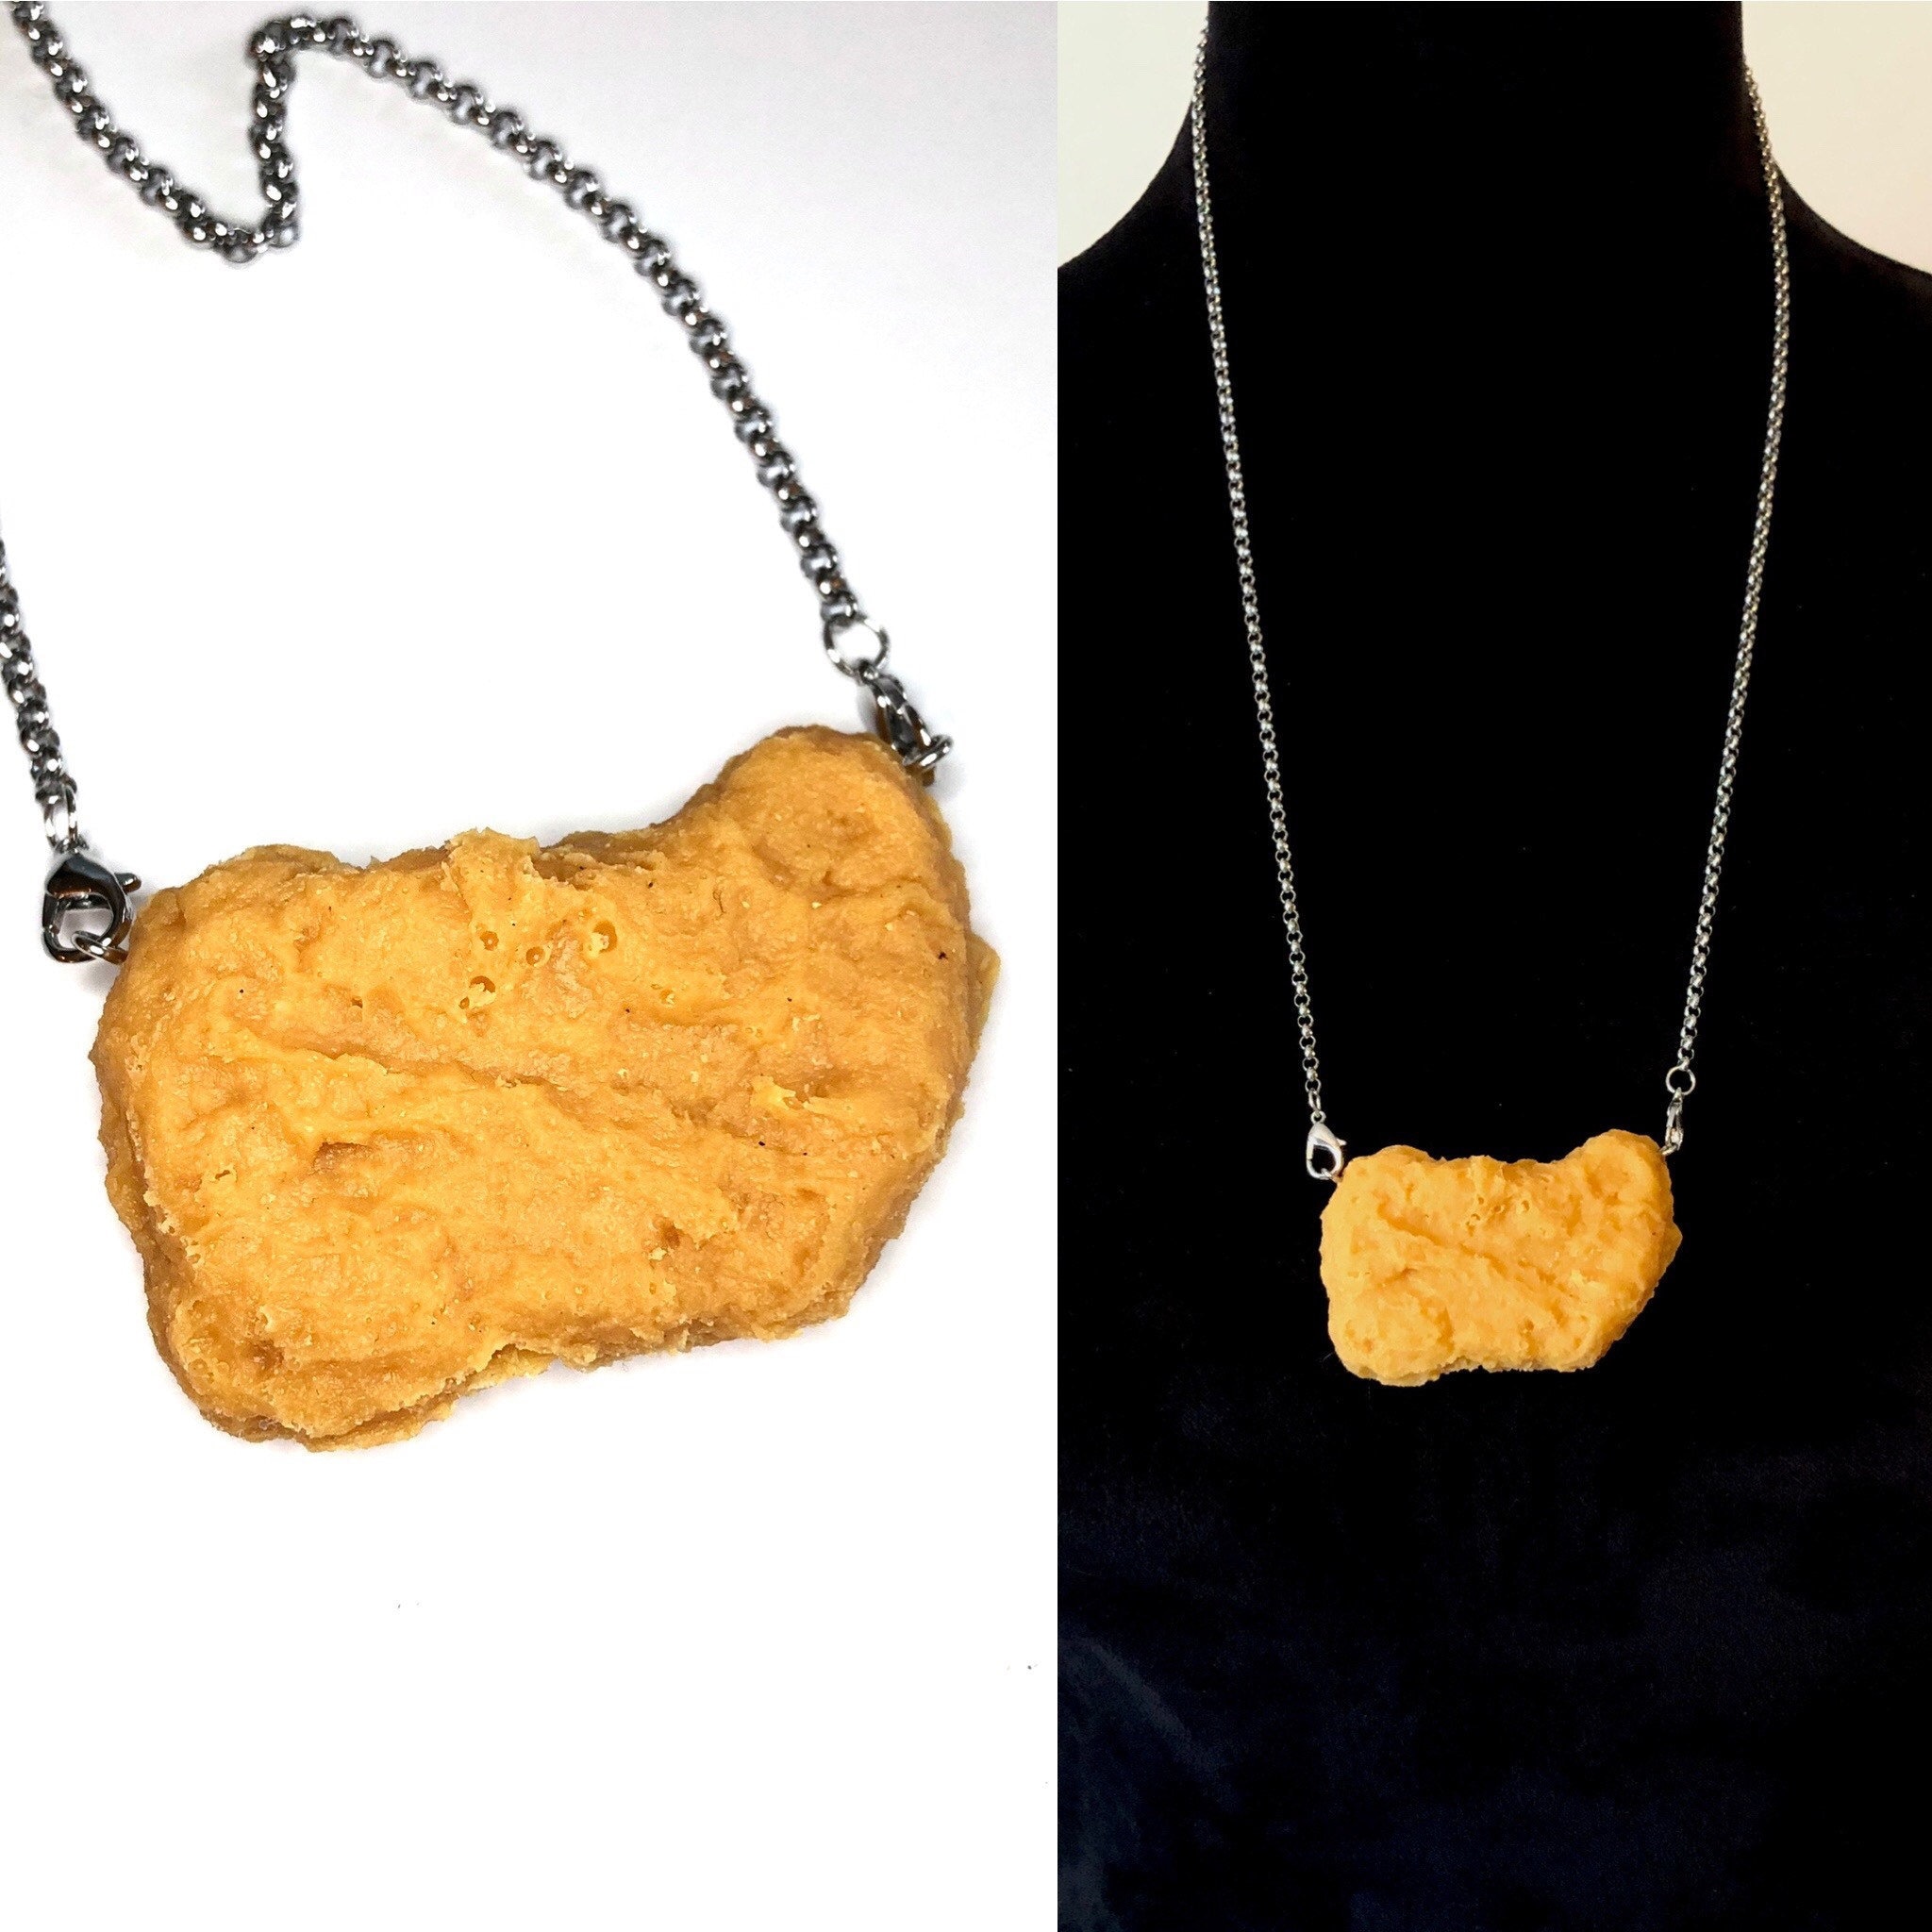 Thug Nug Necklace gold Speckled Sunglasses, Real Chicken Nugget - Etsy